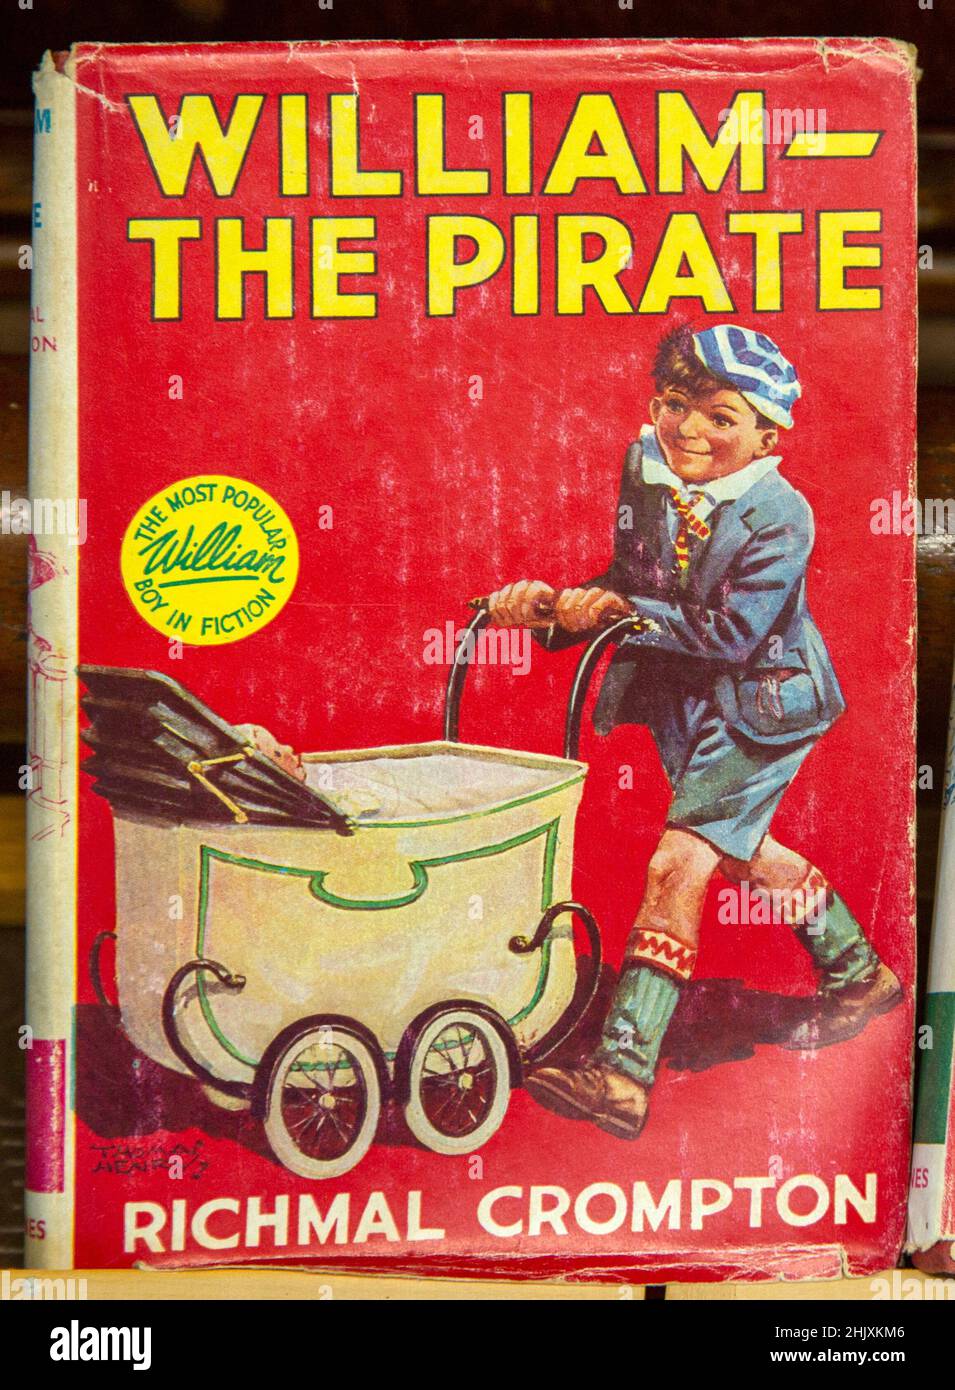 William - The Pirate old hardback book by Richmal Crompton, close up, UK Stock Photo